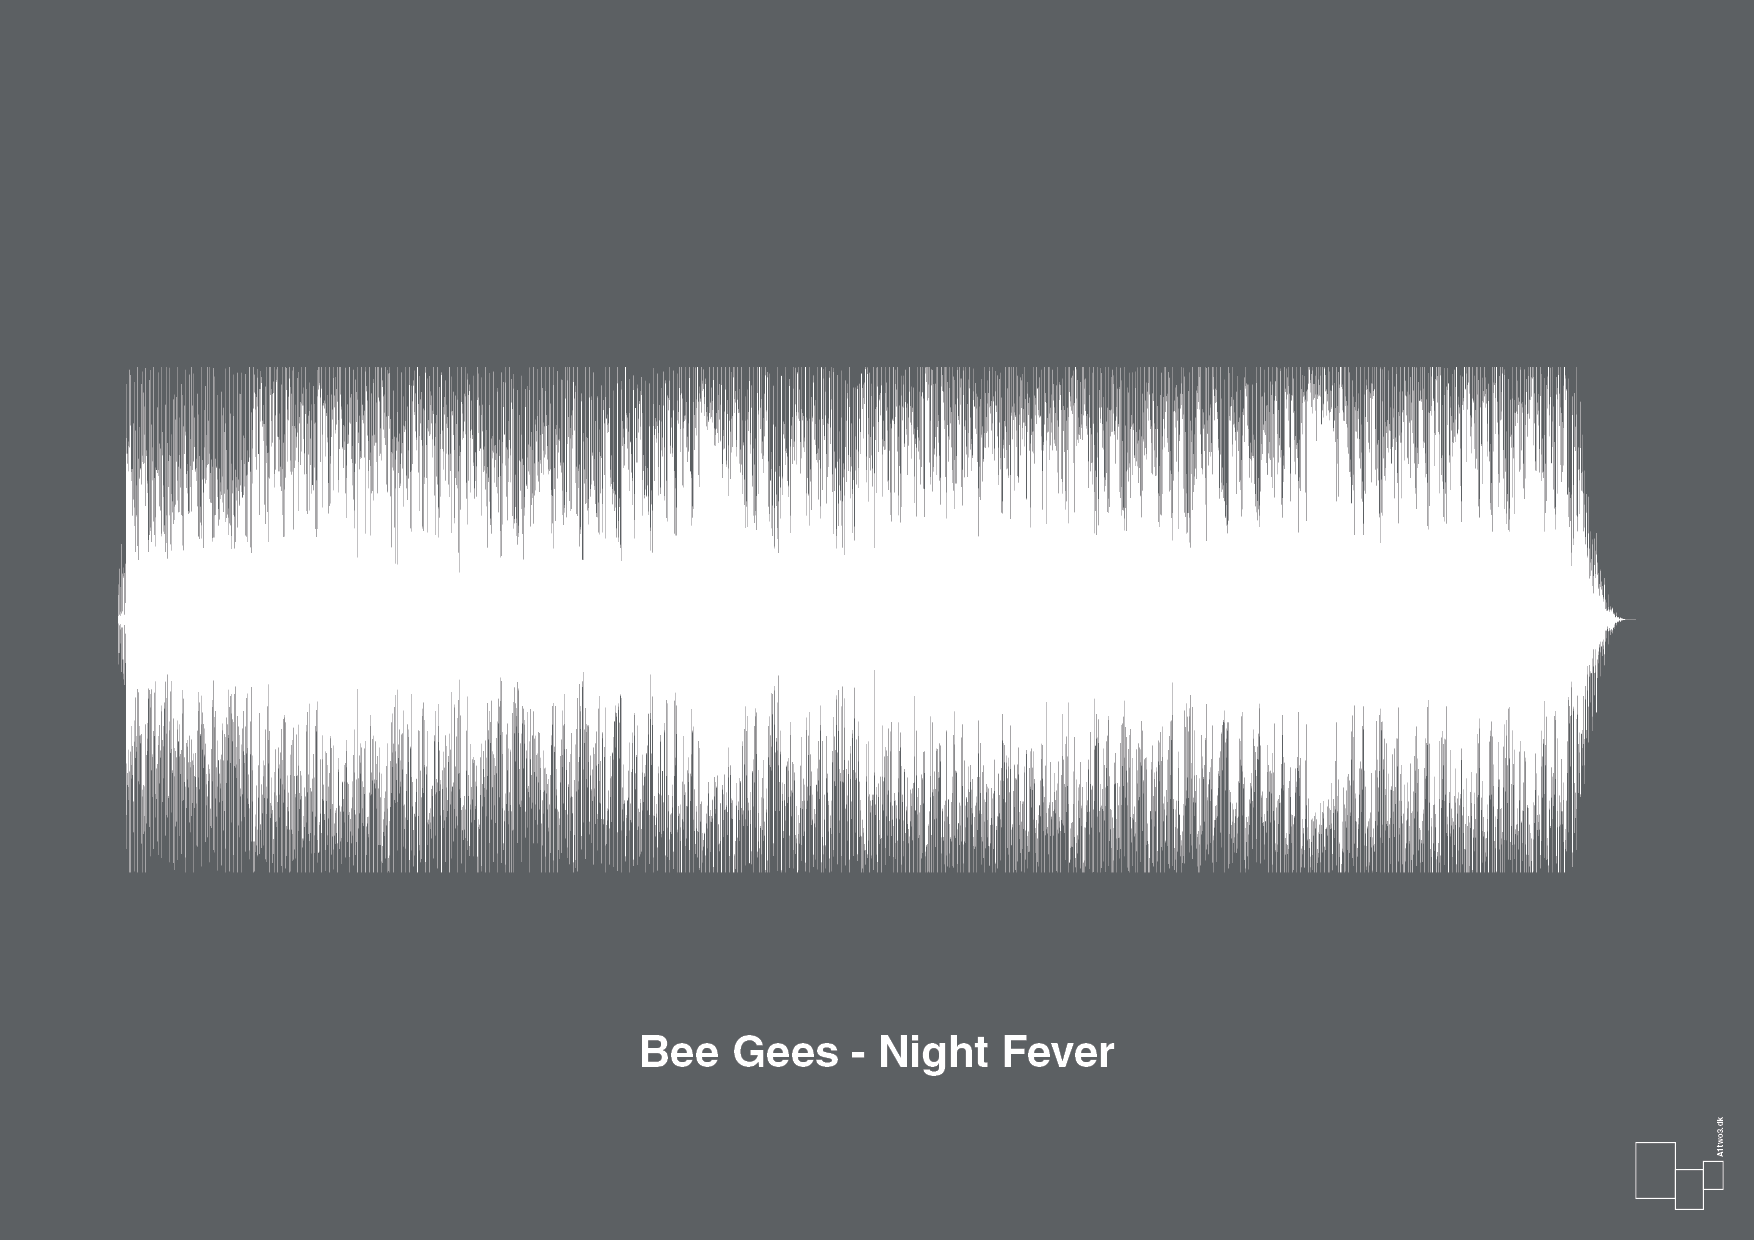 bee gees - night fever - Plakat med Musik i Graphic Charcoal